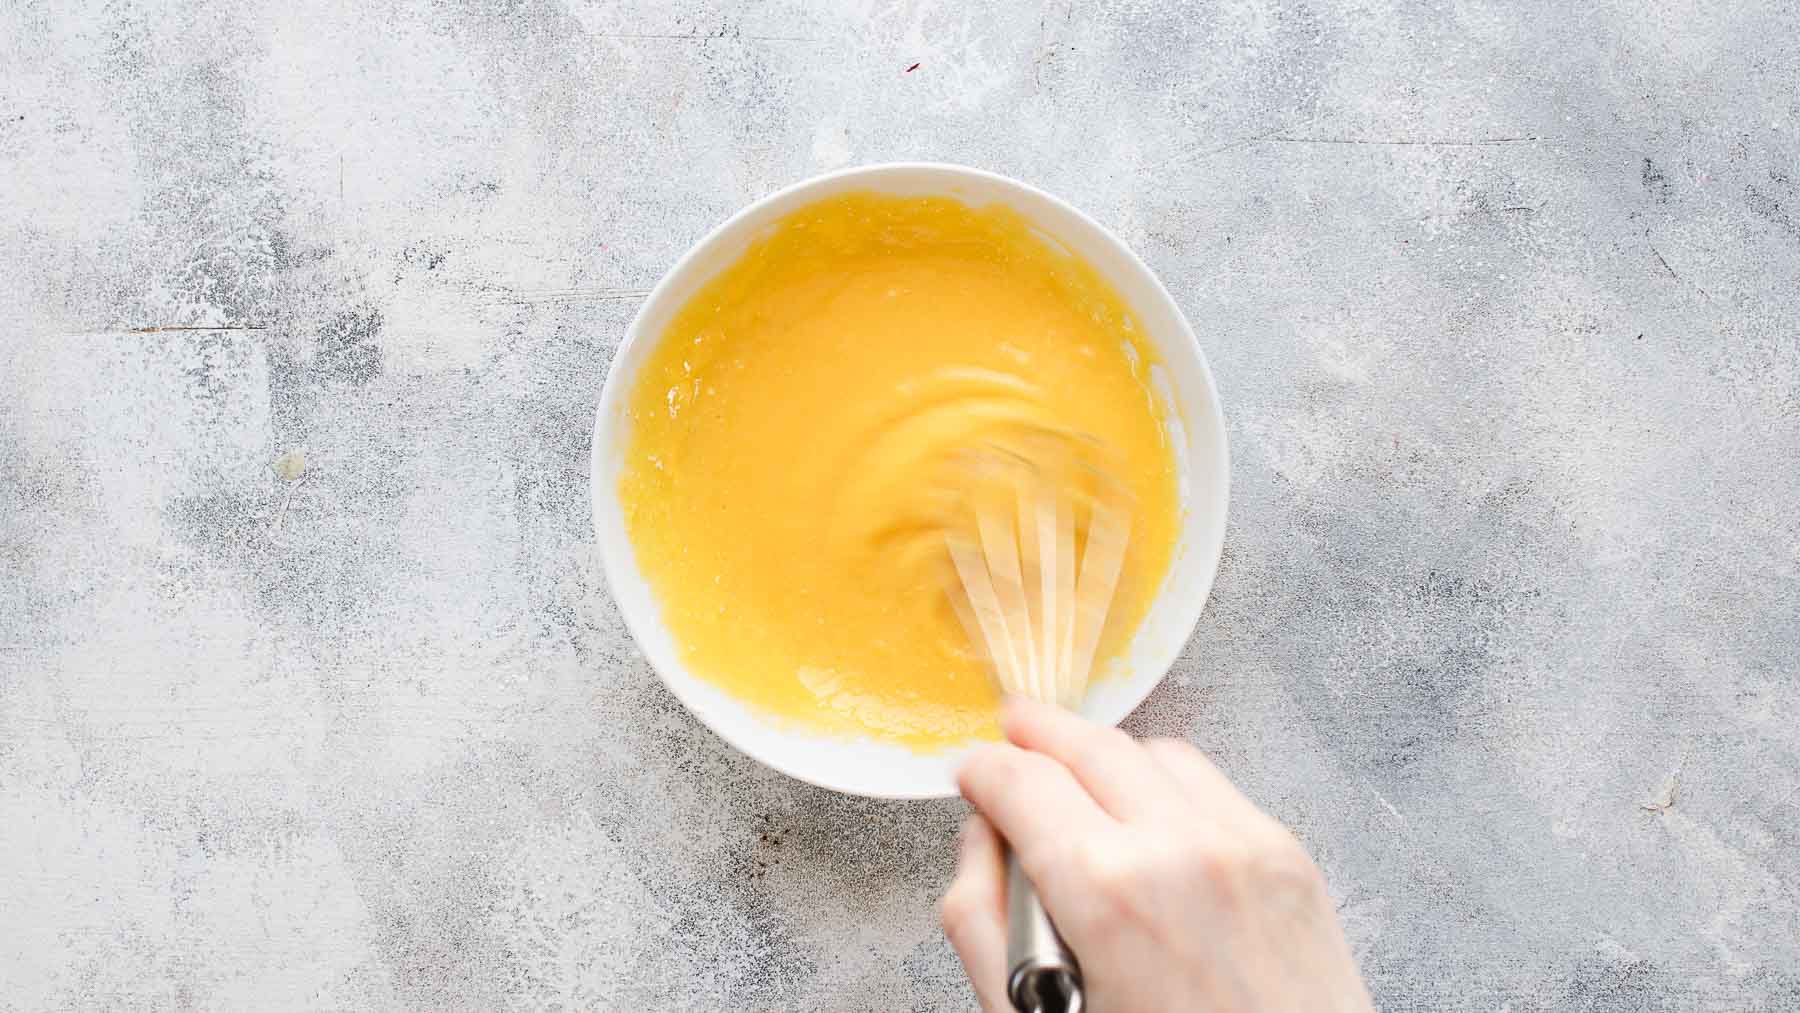 whisking egg yolks and cornstarch in a small bowl